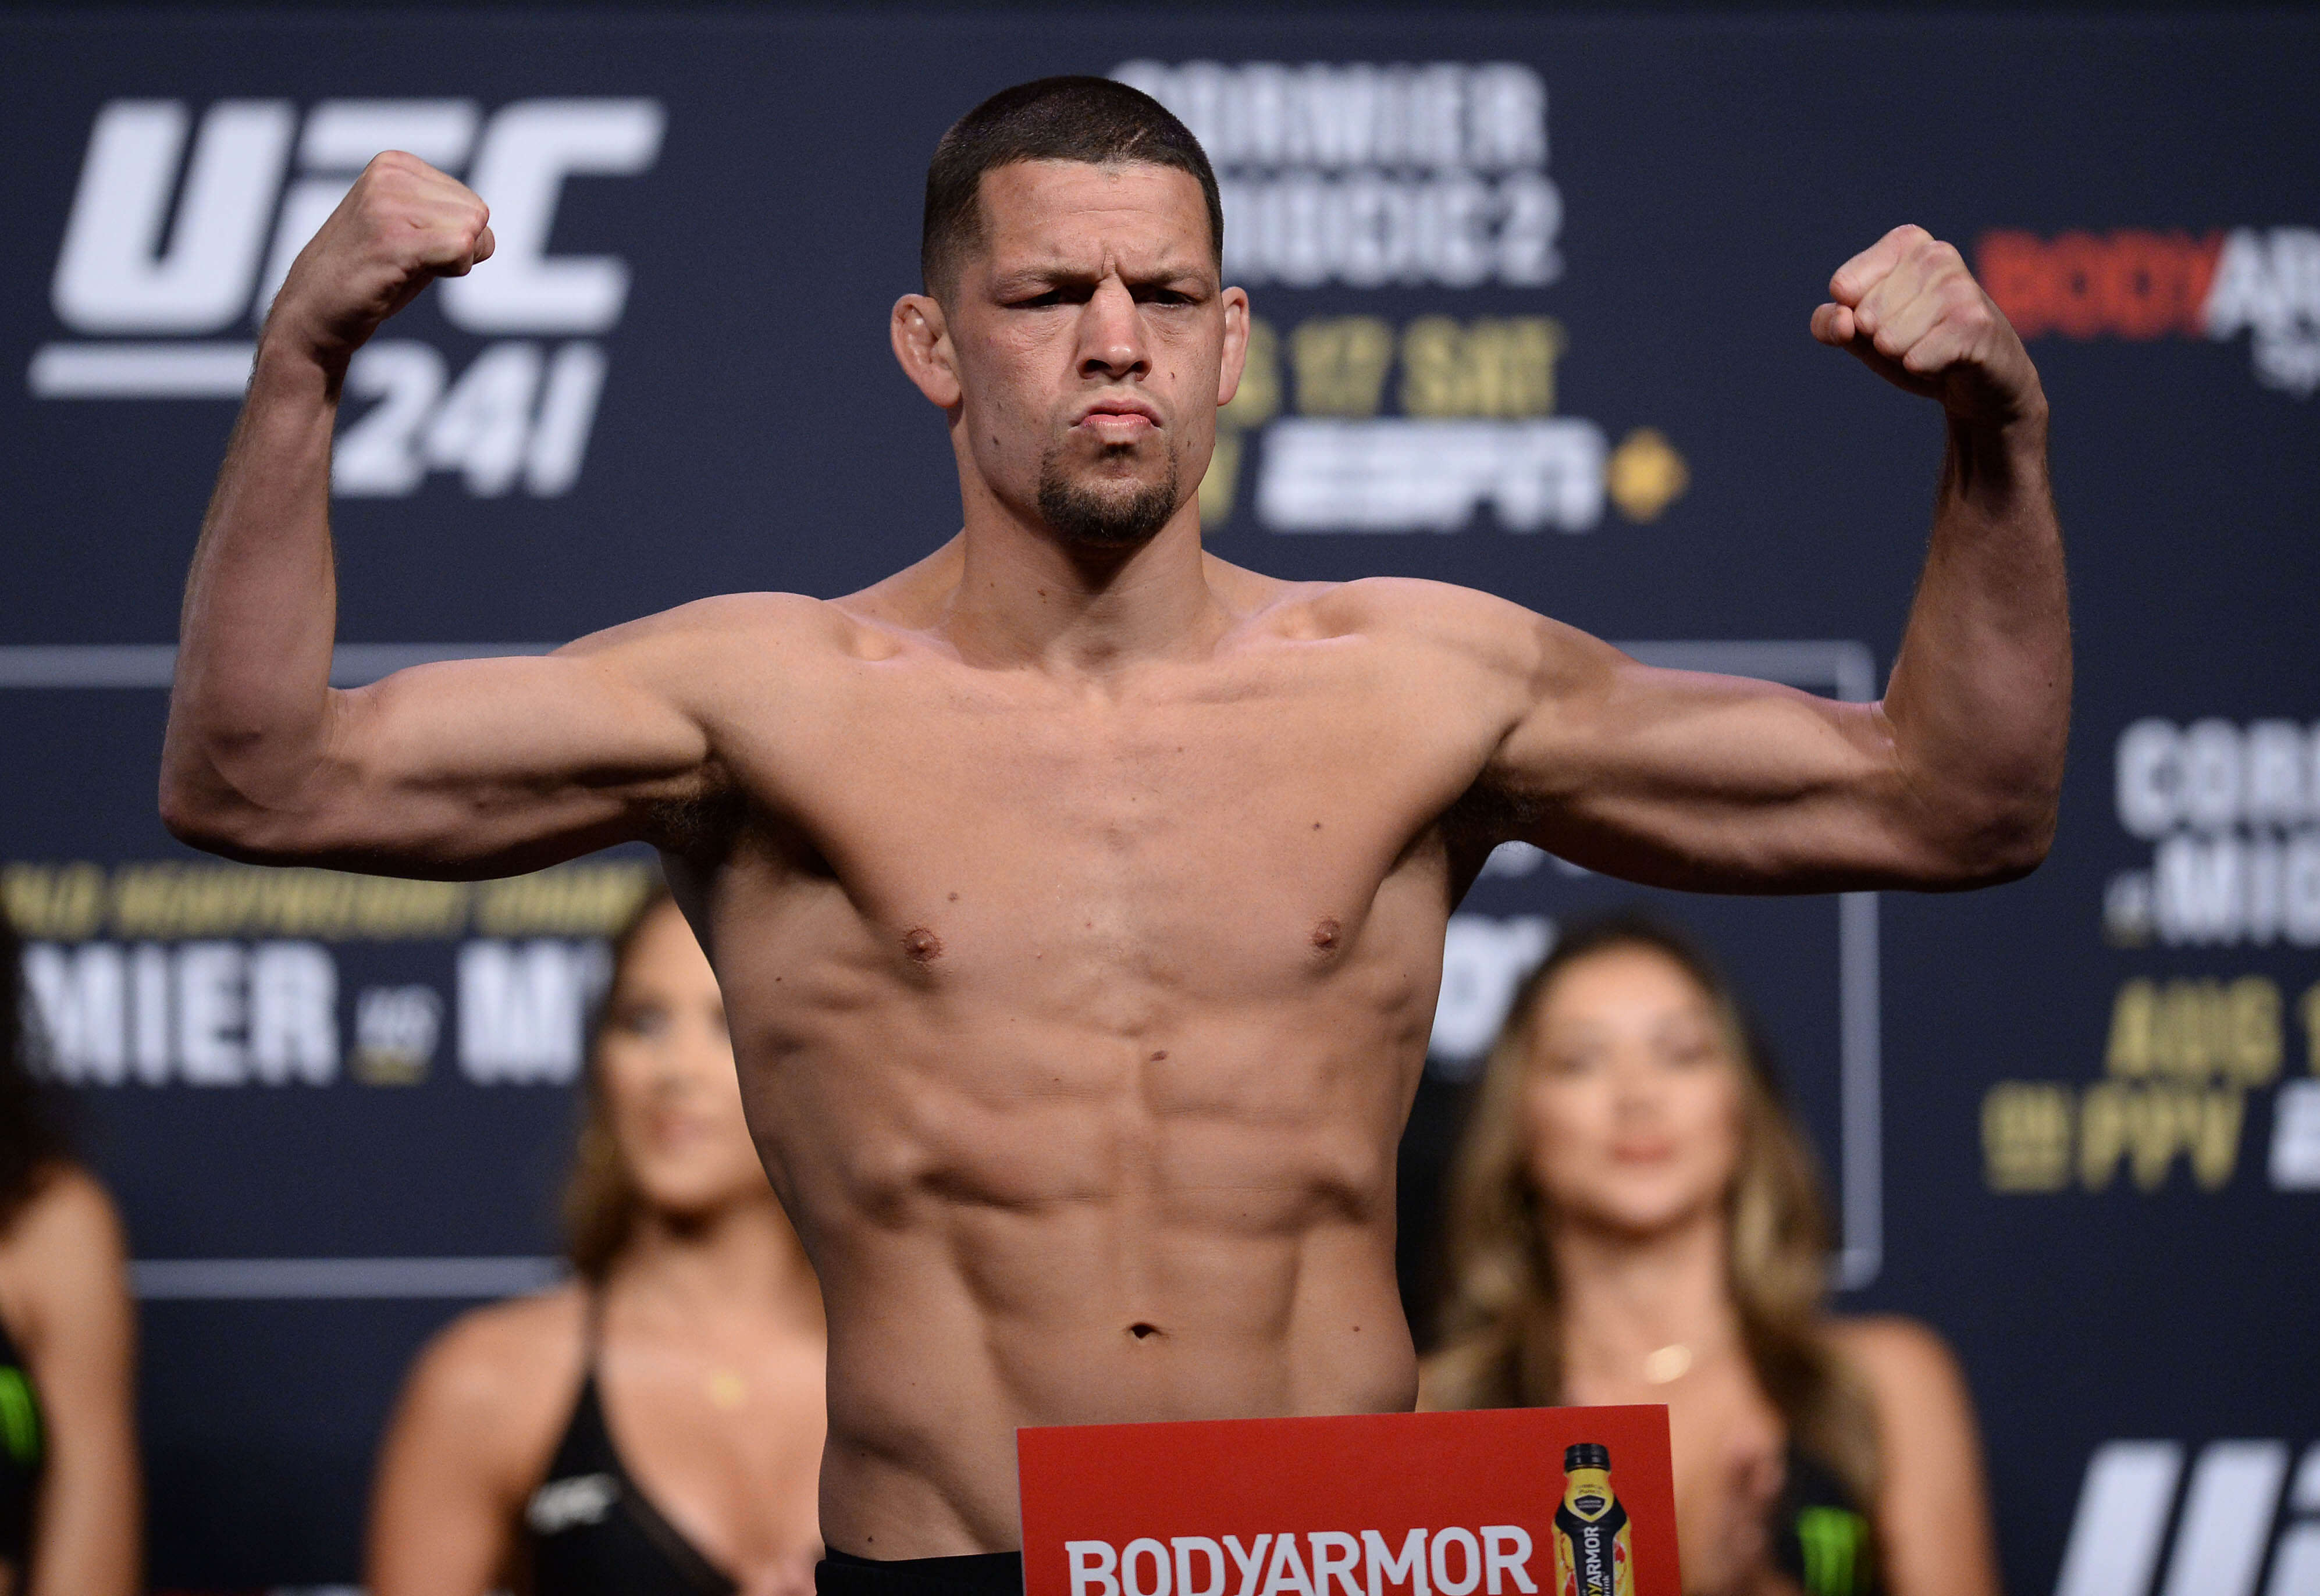 UFC: What's next for Nate Diaz?